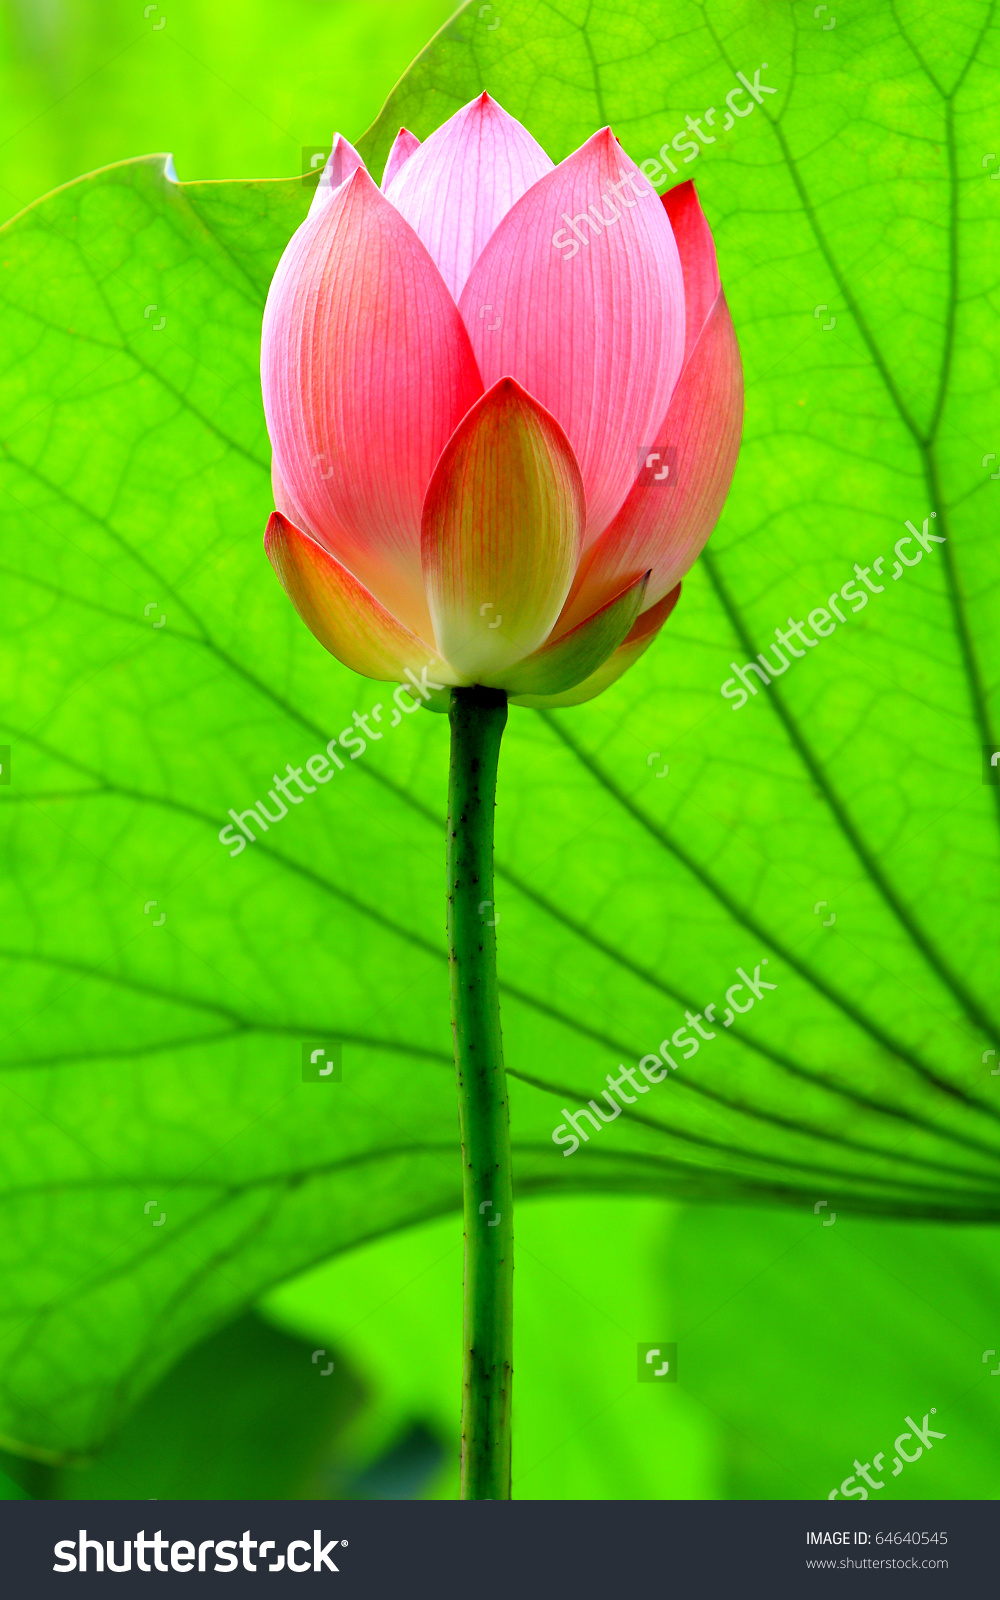 Red Lotus Flower Bud Against Green Stock Photo 64640545.